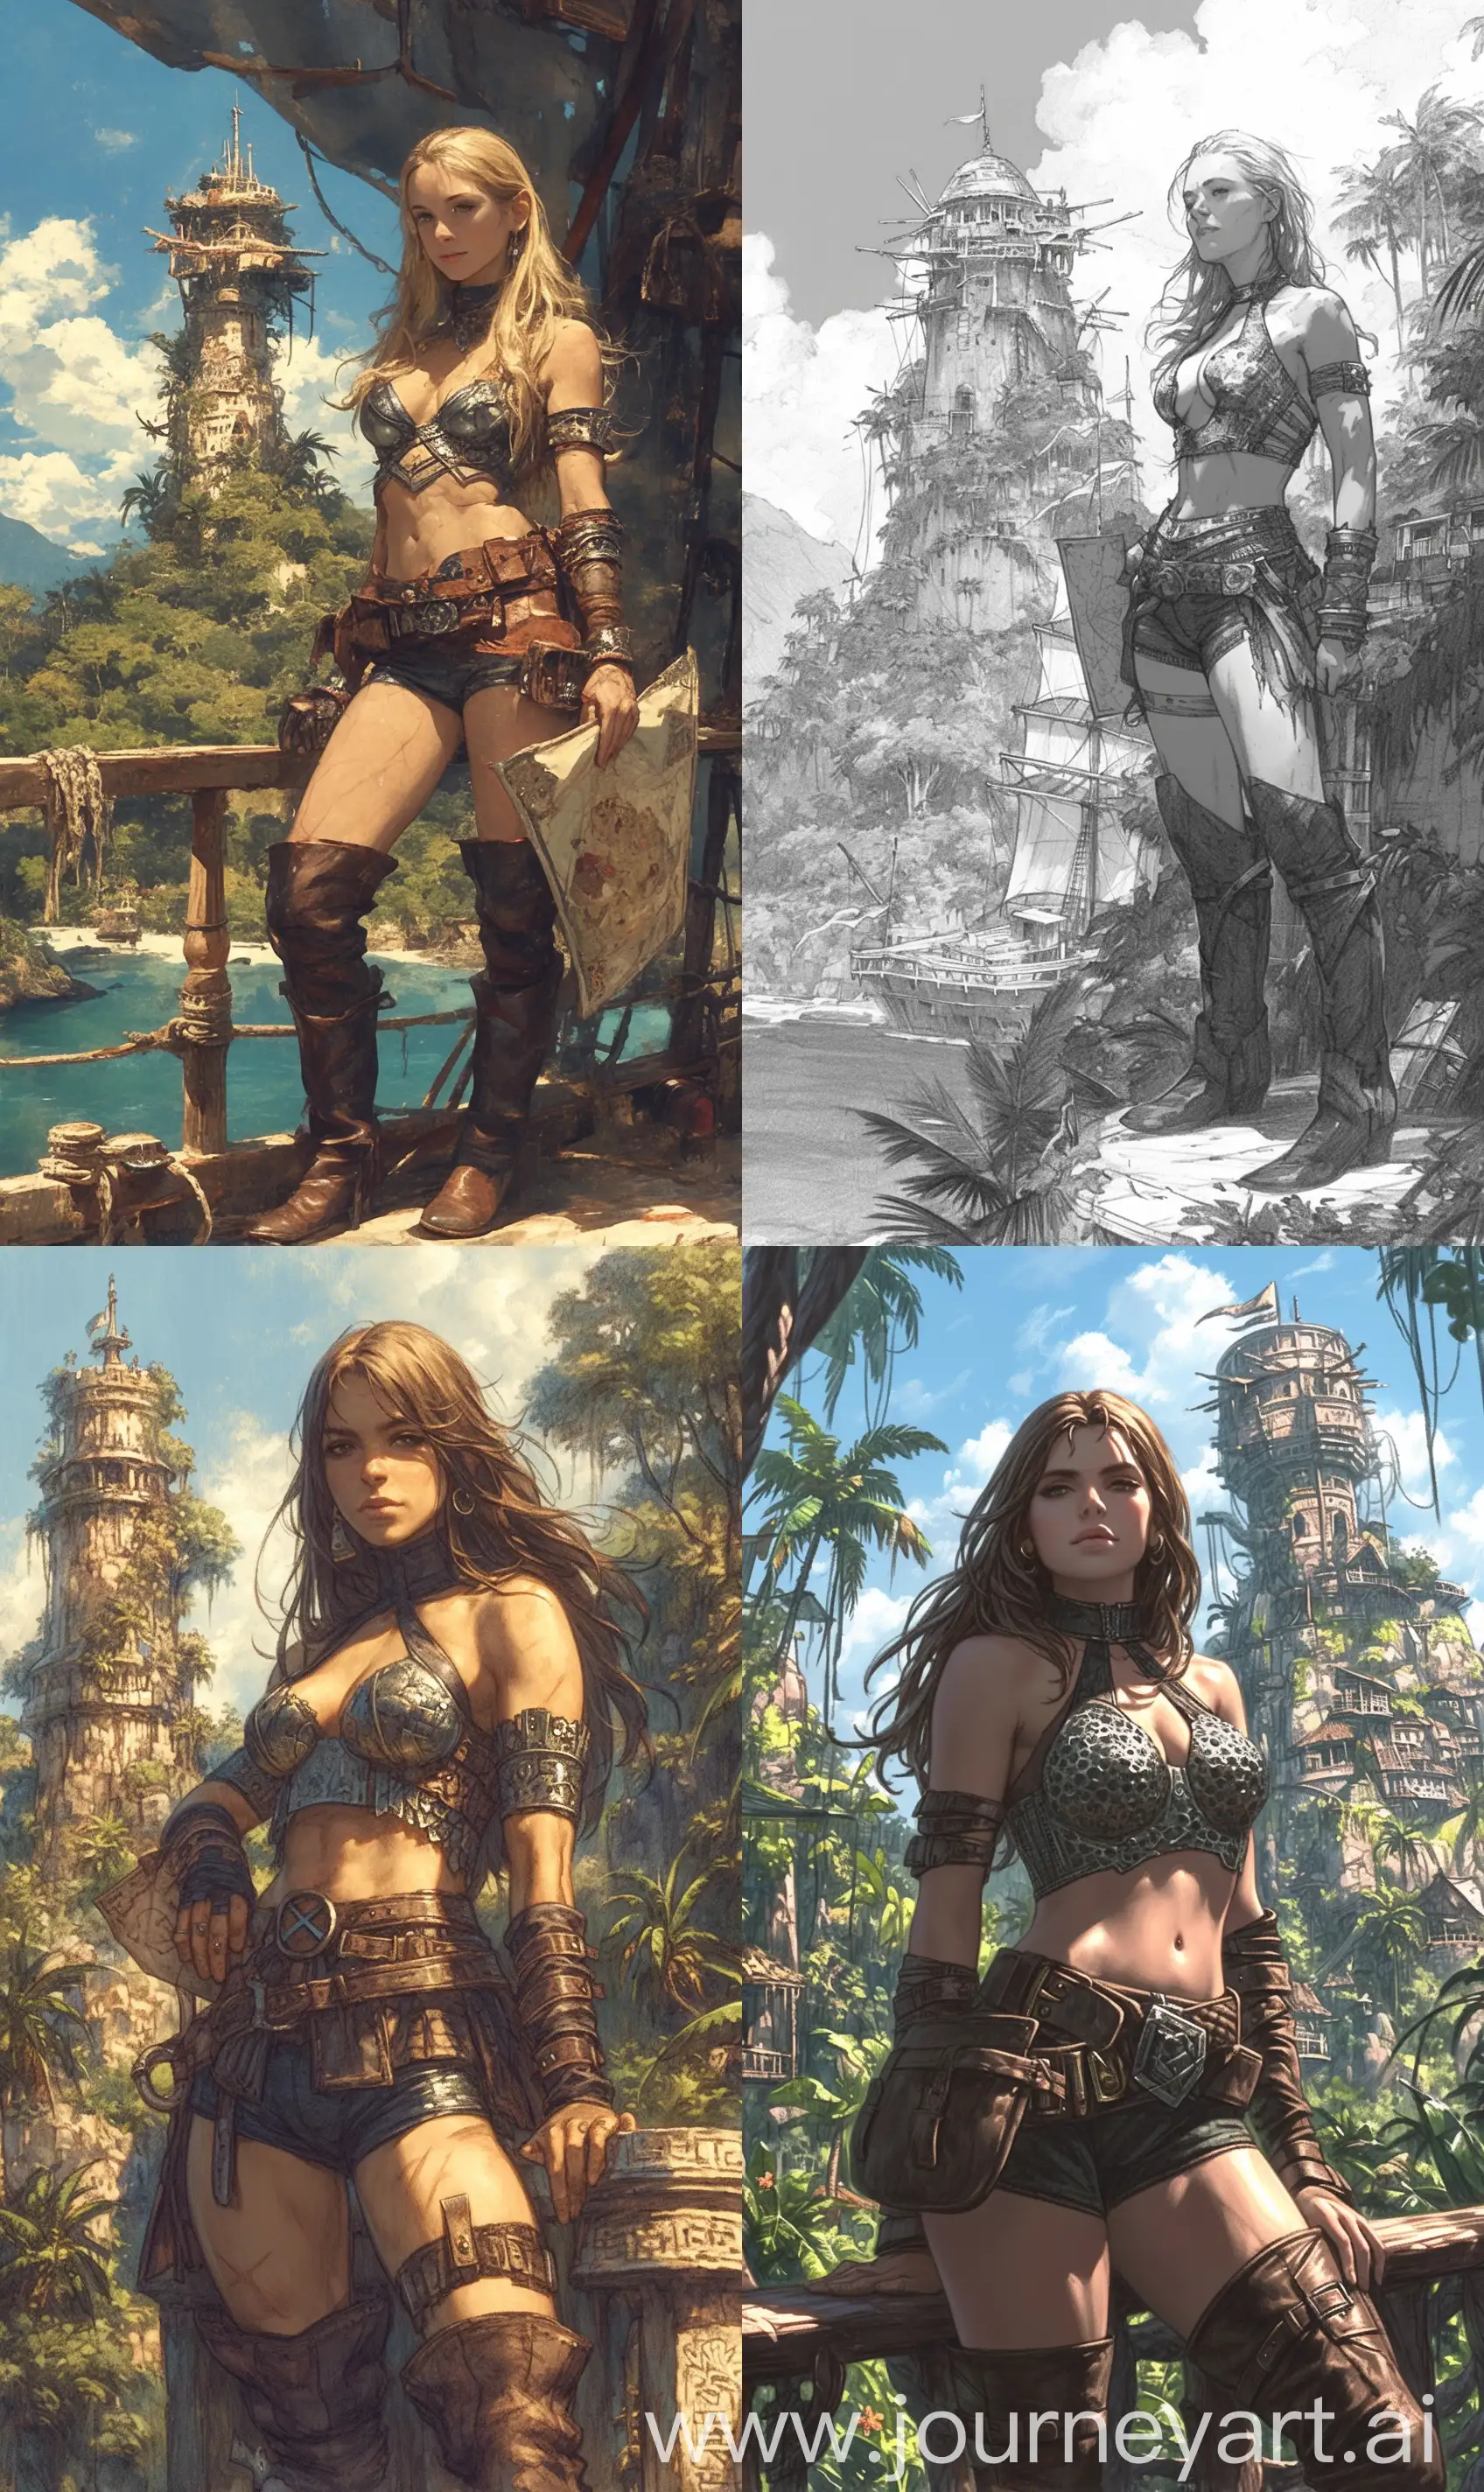 On the sailing frigate standing a Women warrior-queen in an exquisite costume with metal inserts resembling armor, a halter top, short shorts and leather high boots, holding a map of treasures, on the back of a tower of wizards and magic, mount and jungle , Luis Royo style, features, ancient, highly detailed, action poses, awesome face, complex, sketchbook art, composition, pencil art, X-Men comic book cover --niji 6 --ar 3:5 --s 999